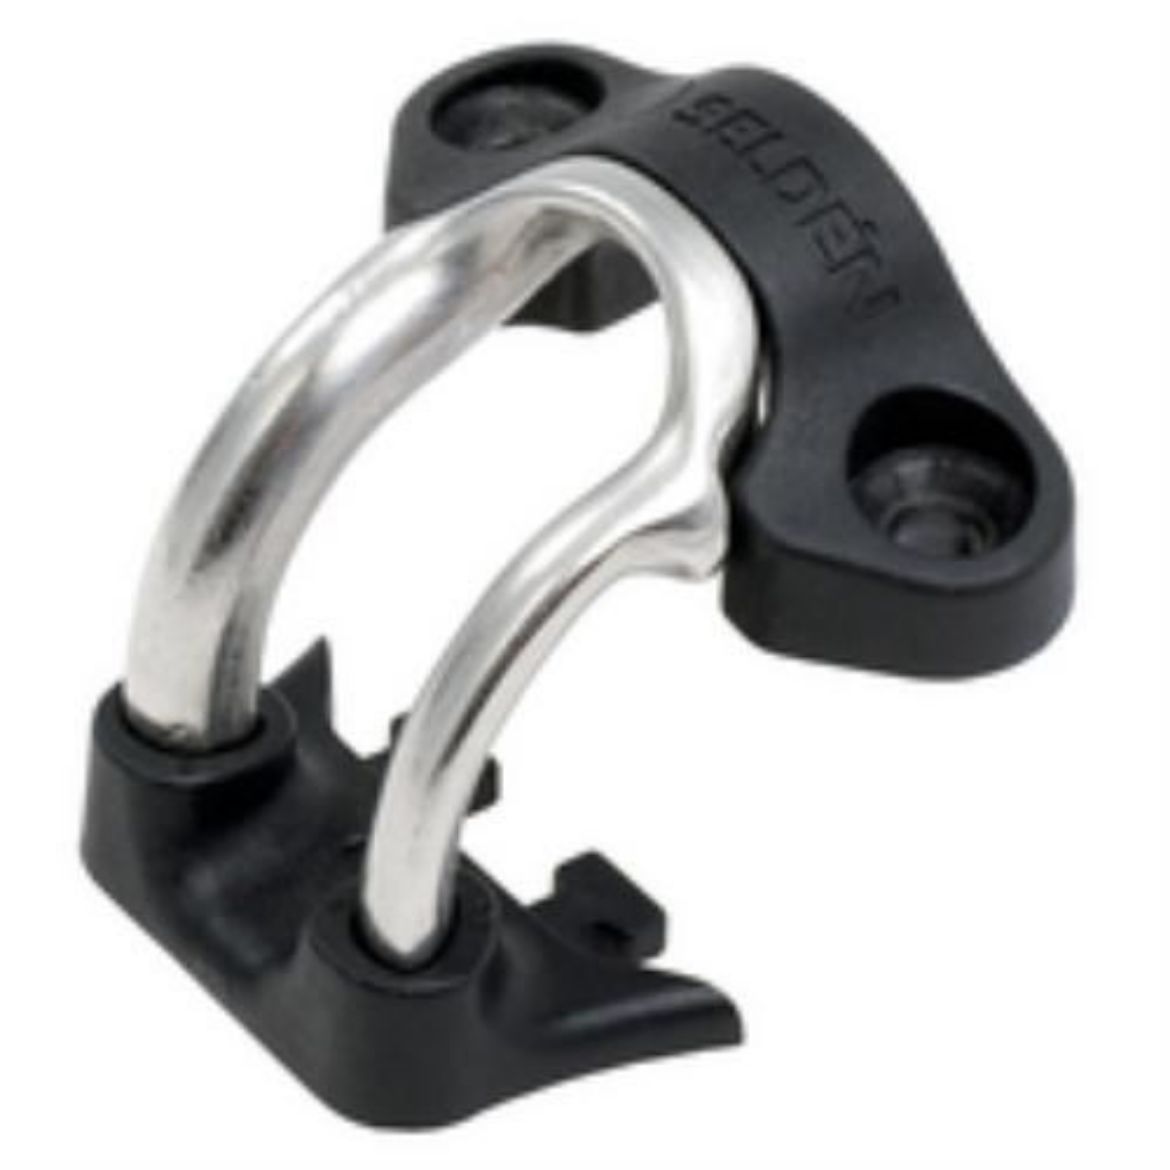 Picture of Selden 27mm Cam Cleat Fairlead